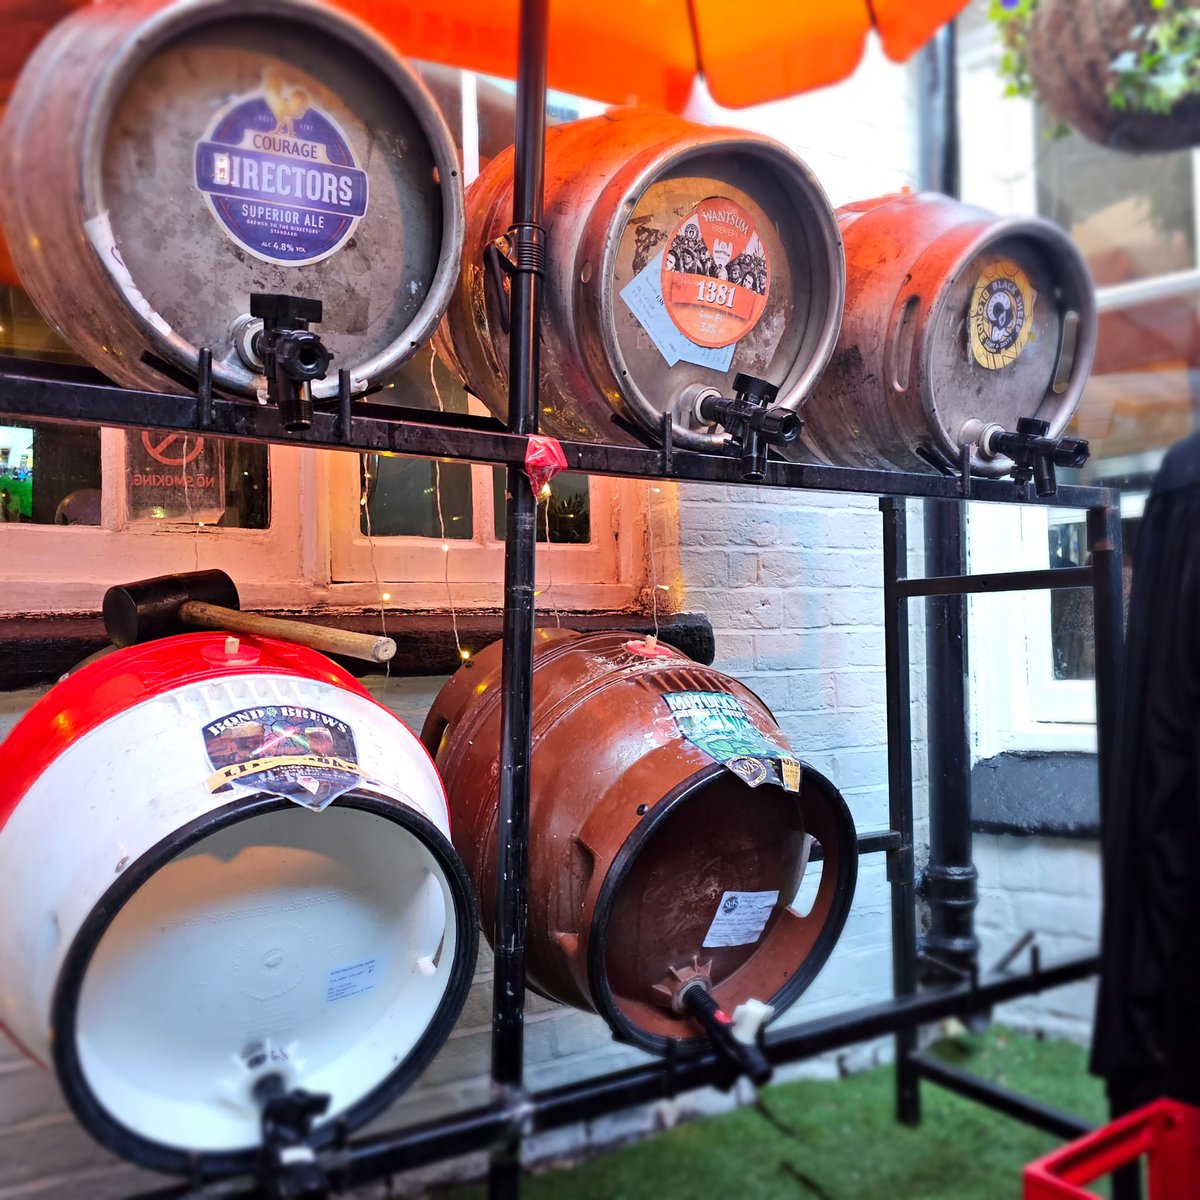 We have 5 extra casks available in the Courtyard over the Easter holiday. So that's 11 cask ales available this weekend. Our Sunday pie roast will also be available on Easter Sunday. Even more of a reason to pop in! #newbeery #camra #indiesnewbury #cask #ale